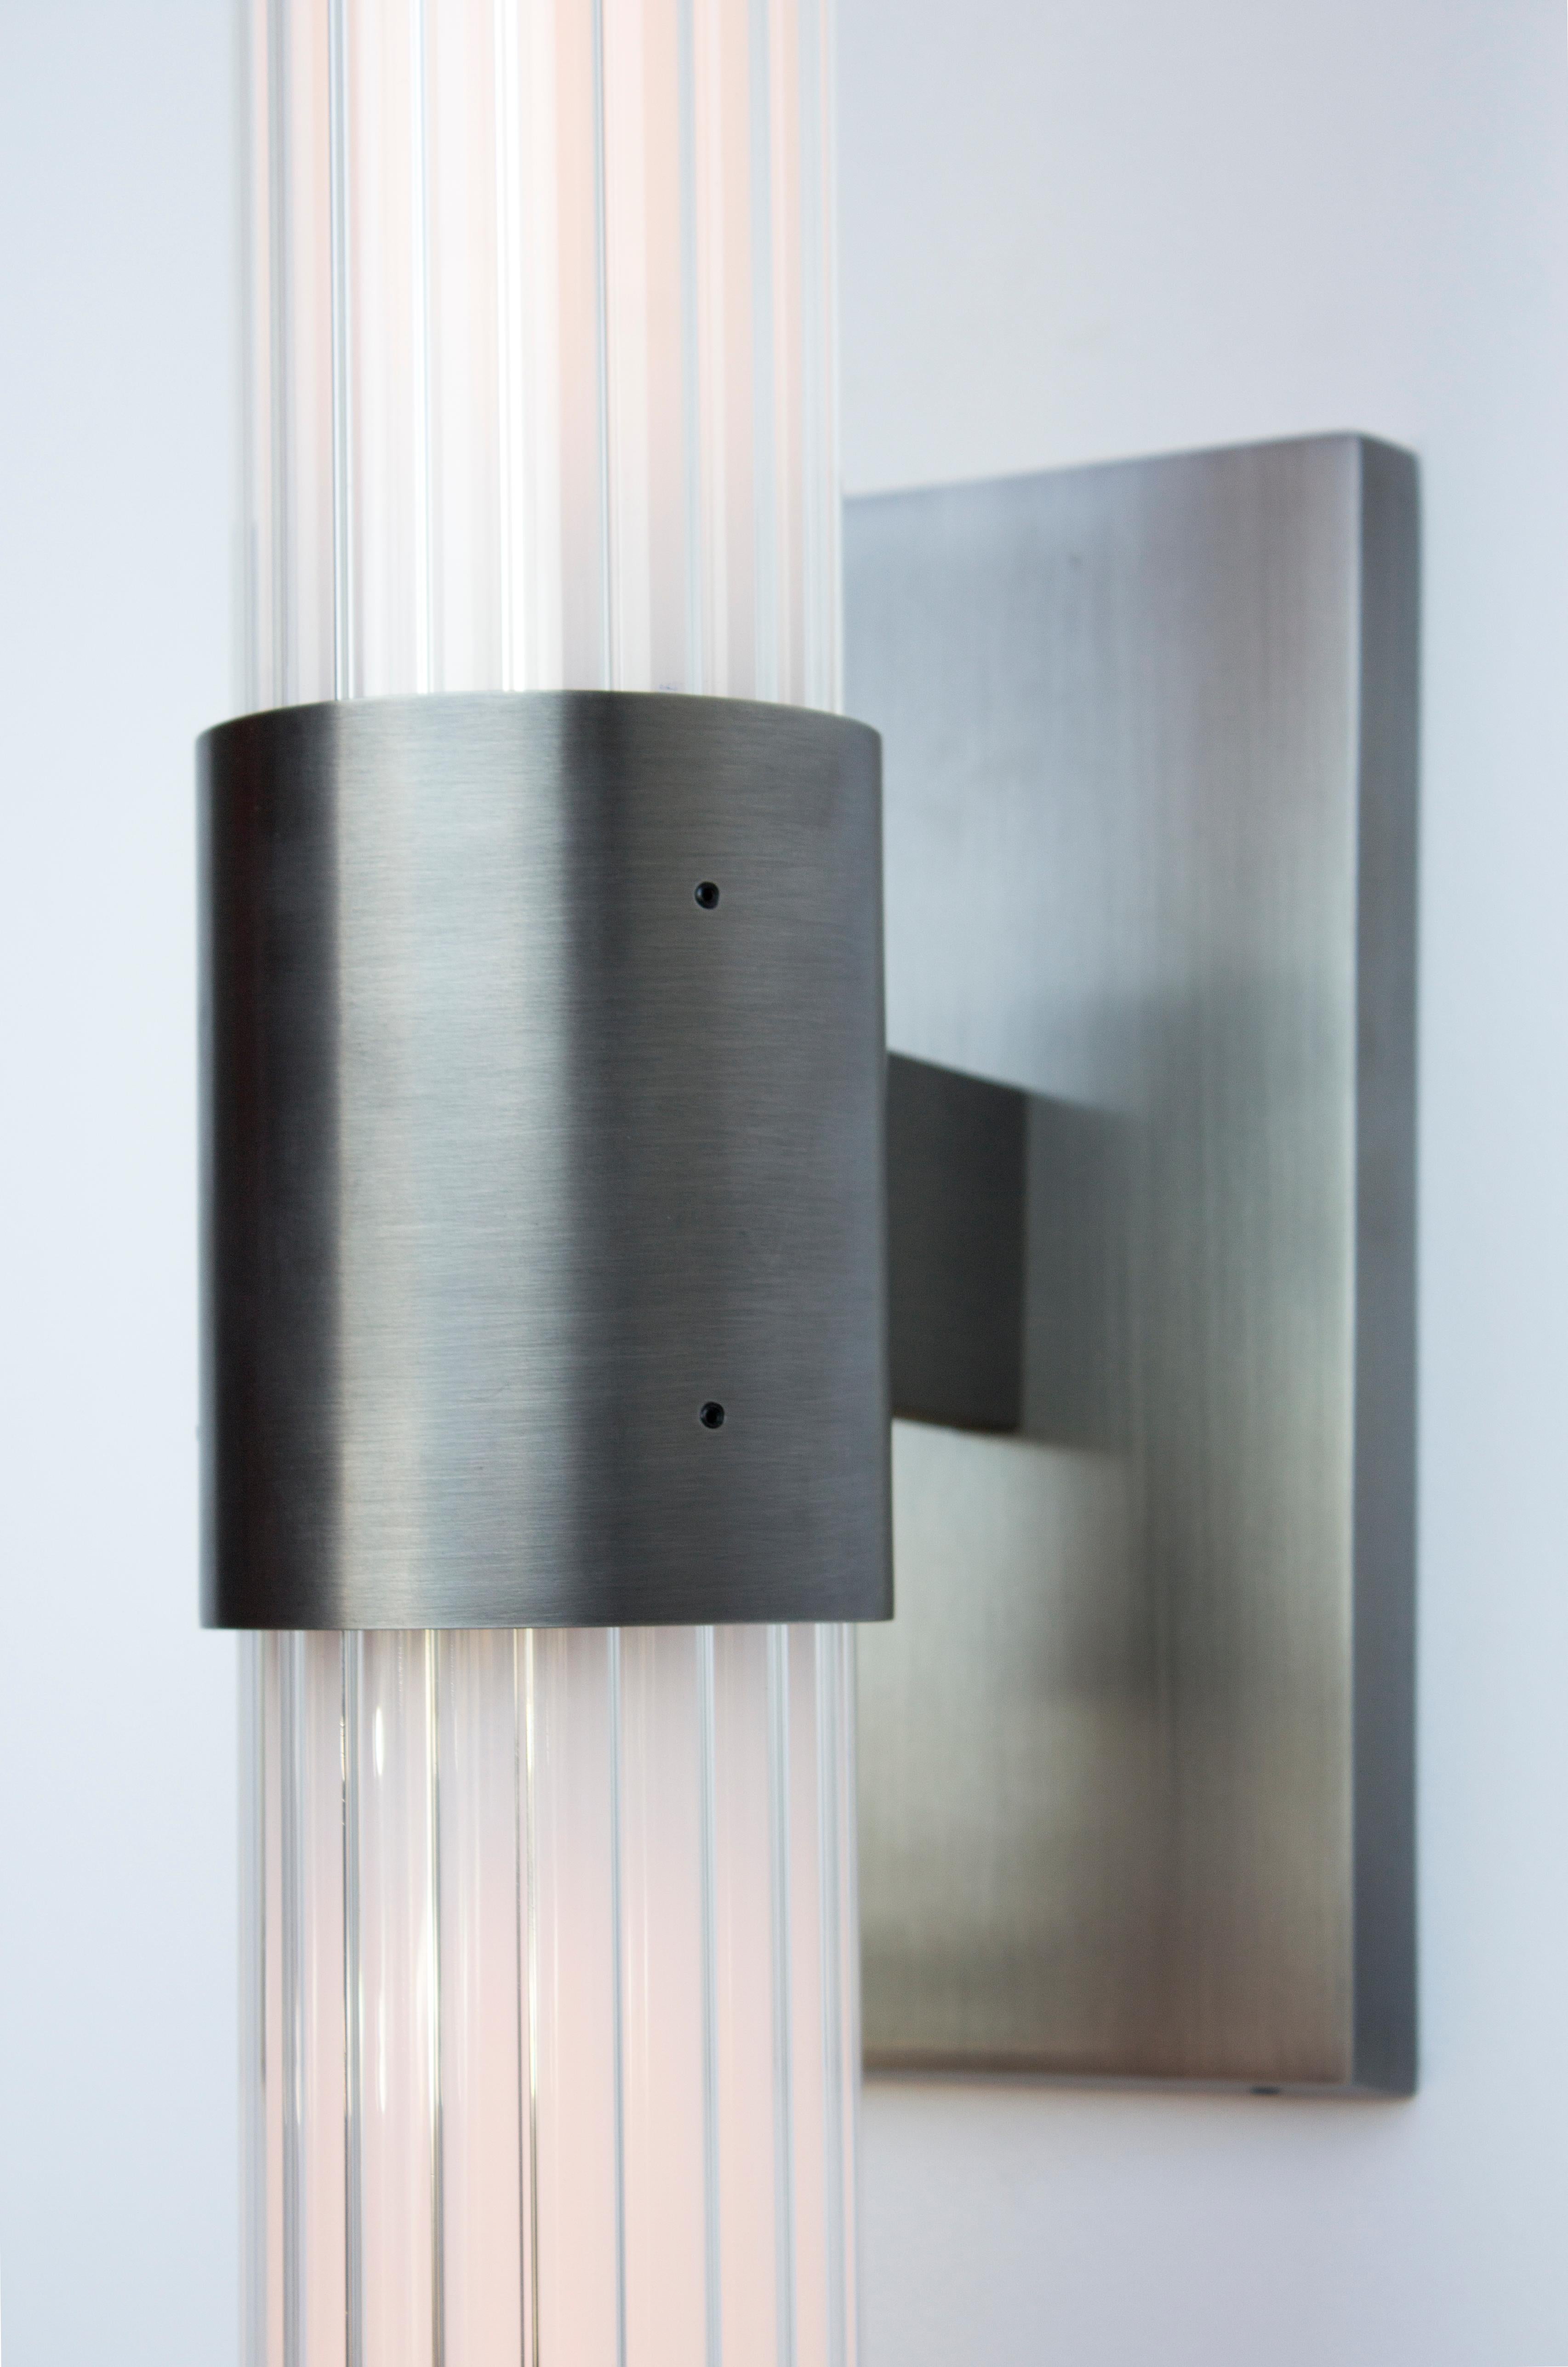 The Dixie series centers around a bold fluted glass light assembly. The Dixie Sconce puts this detail on display at a gently leaning angle with its wall mounted brass brace available in multiple finishes.

LAMPING:
(2) 5W E-26 LED Tubular T9 Bulbs,